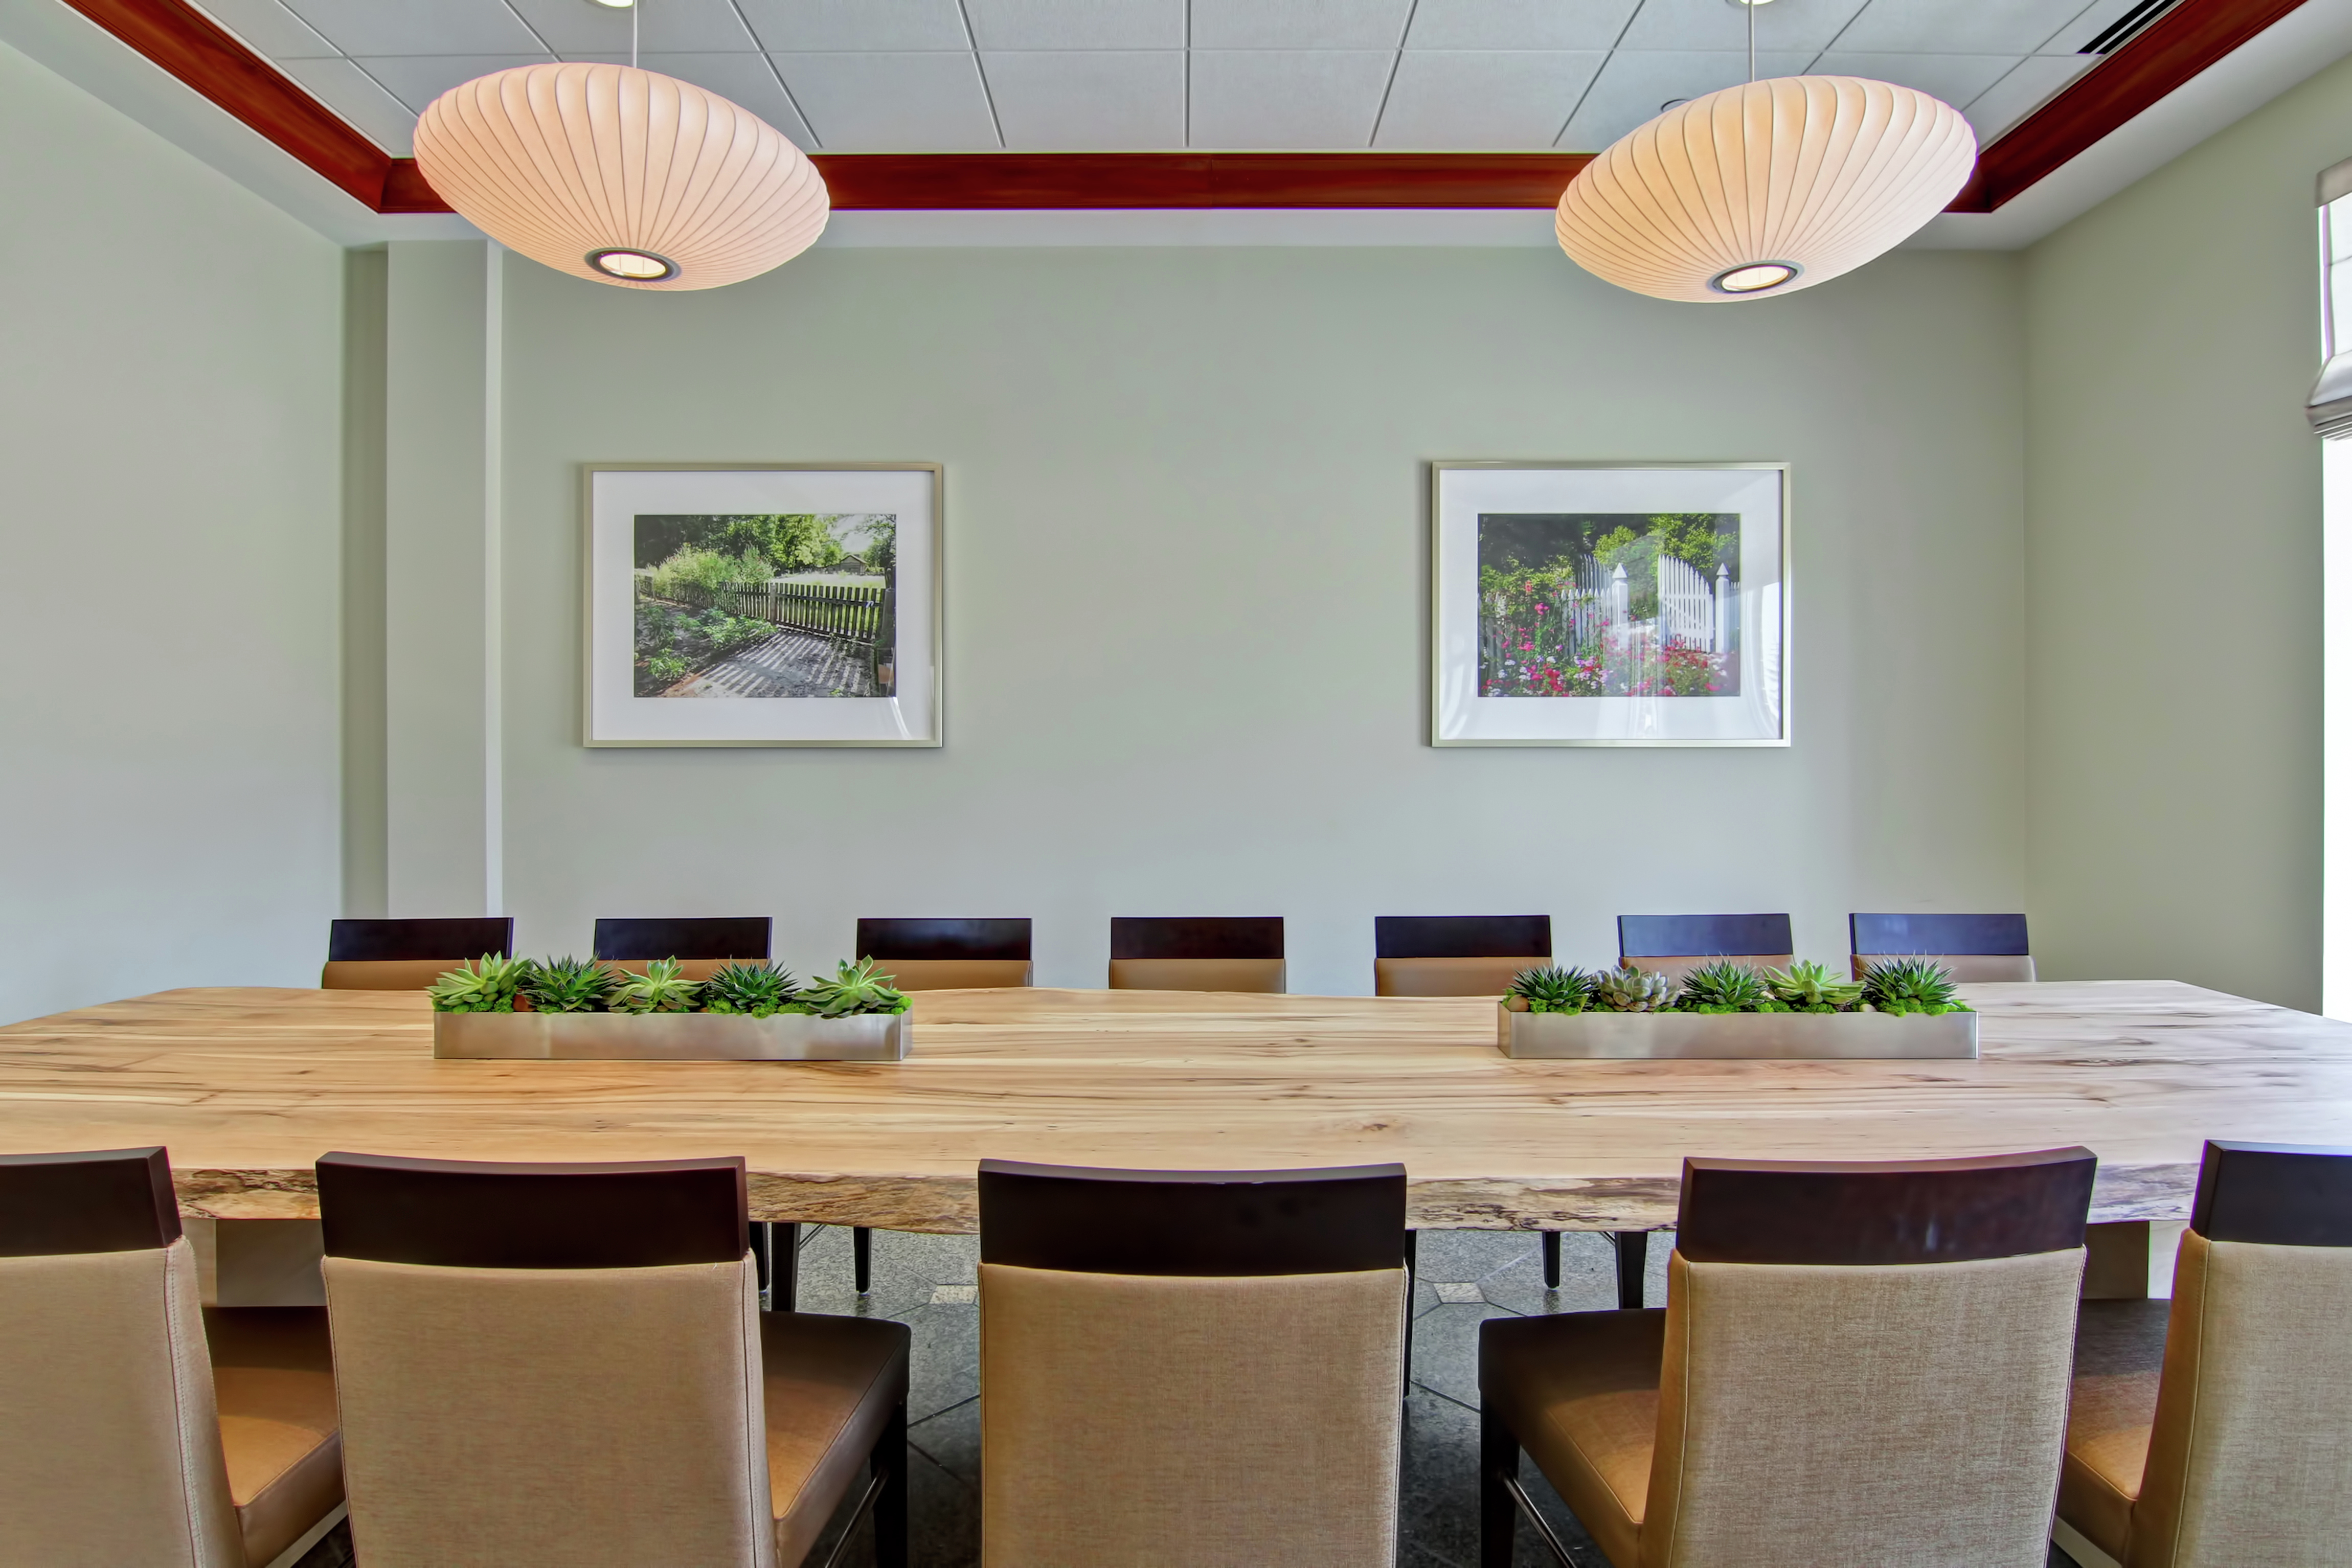 Wall Art and Seating for 14 at Table in Private Dining Room